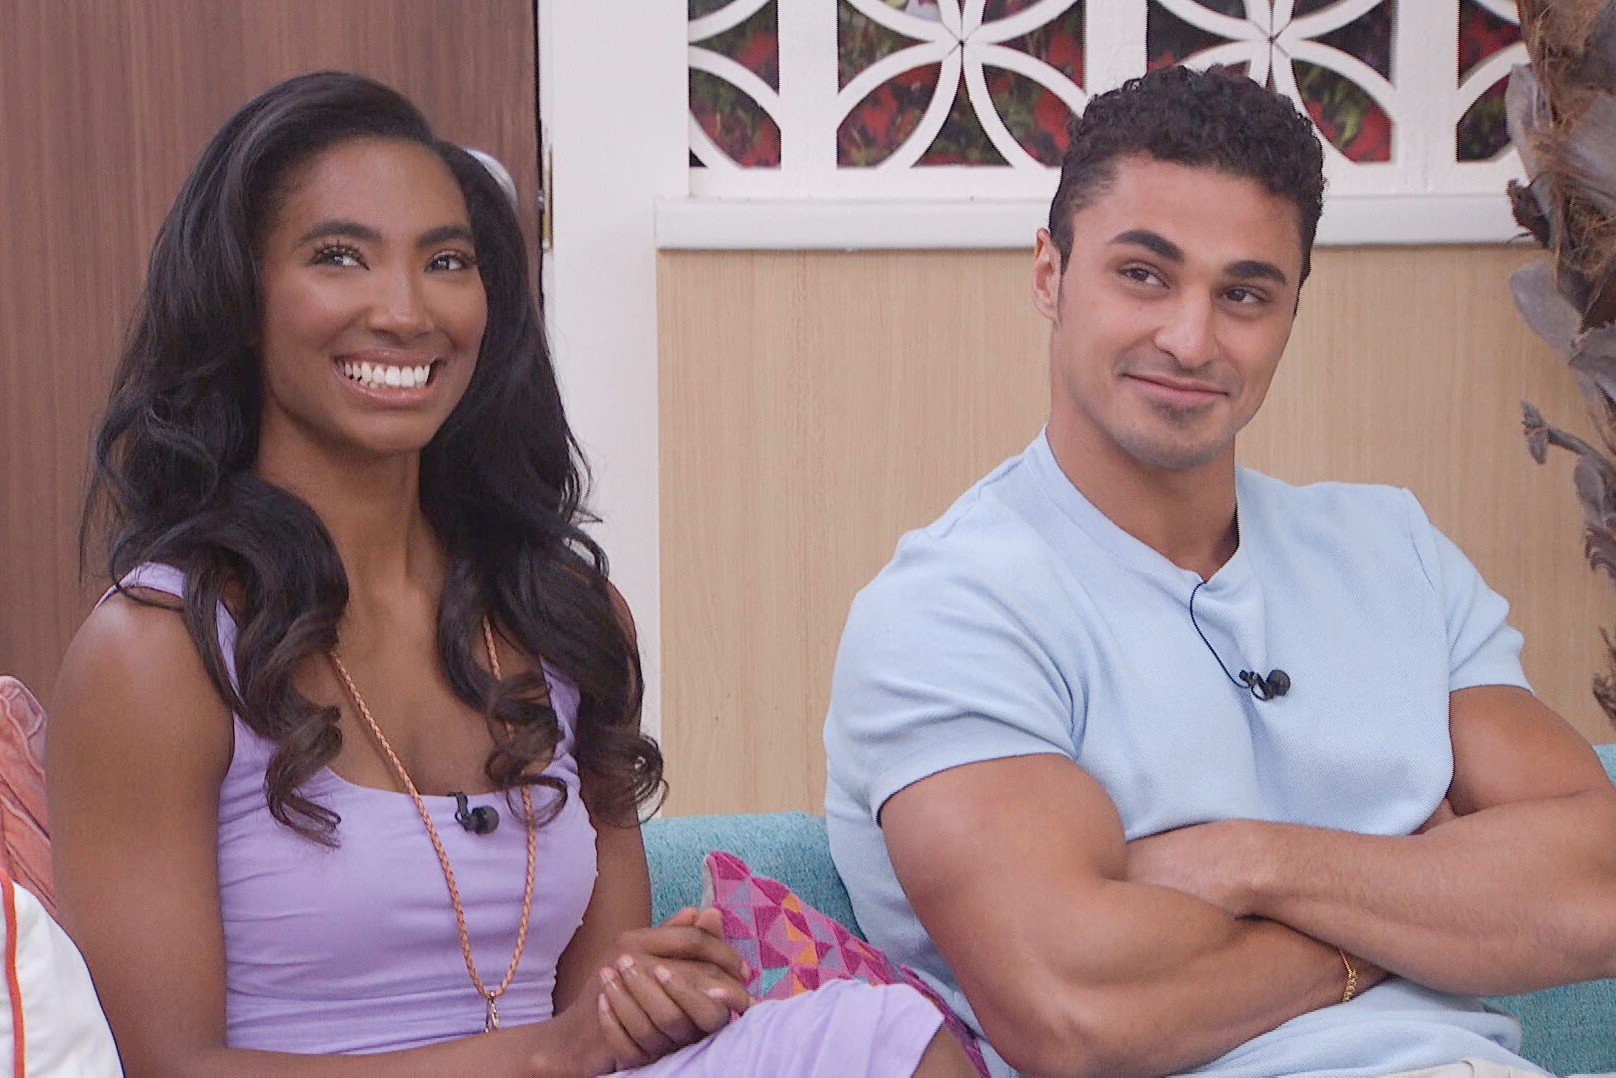 Taylor Hale and Joseph Abdin, who starred in 'Big Brother 24' on CBS, sit next to each other on a couch. Taylor wears a light purple dress. Joseph wears a light blue shirt.